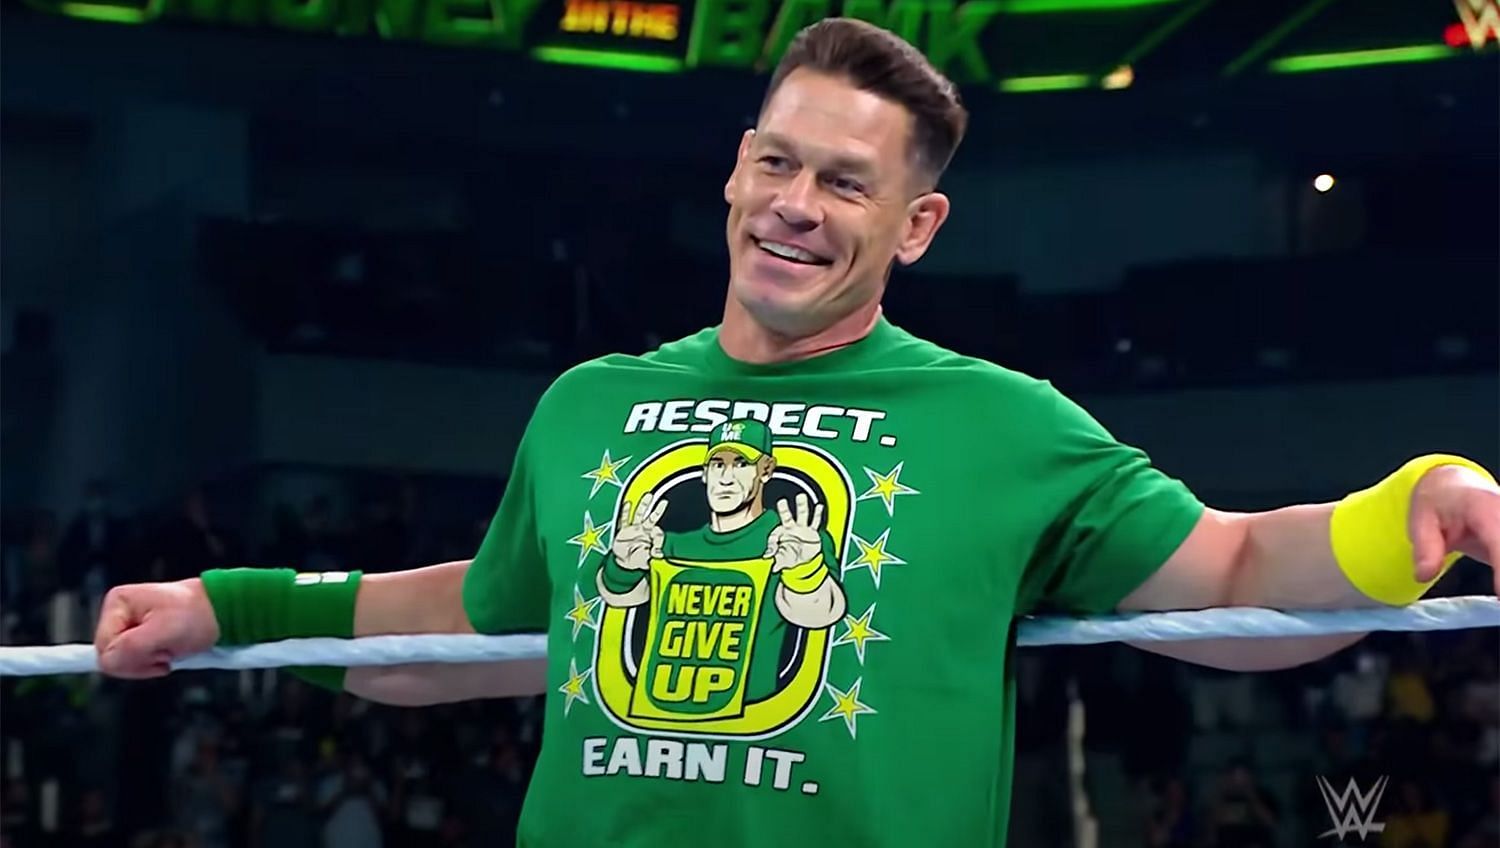 Cena&#039;s 20 years in WWE inspired countless people.